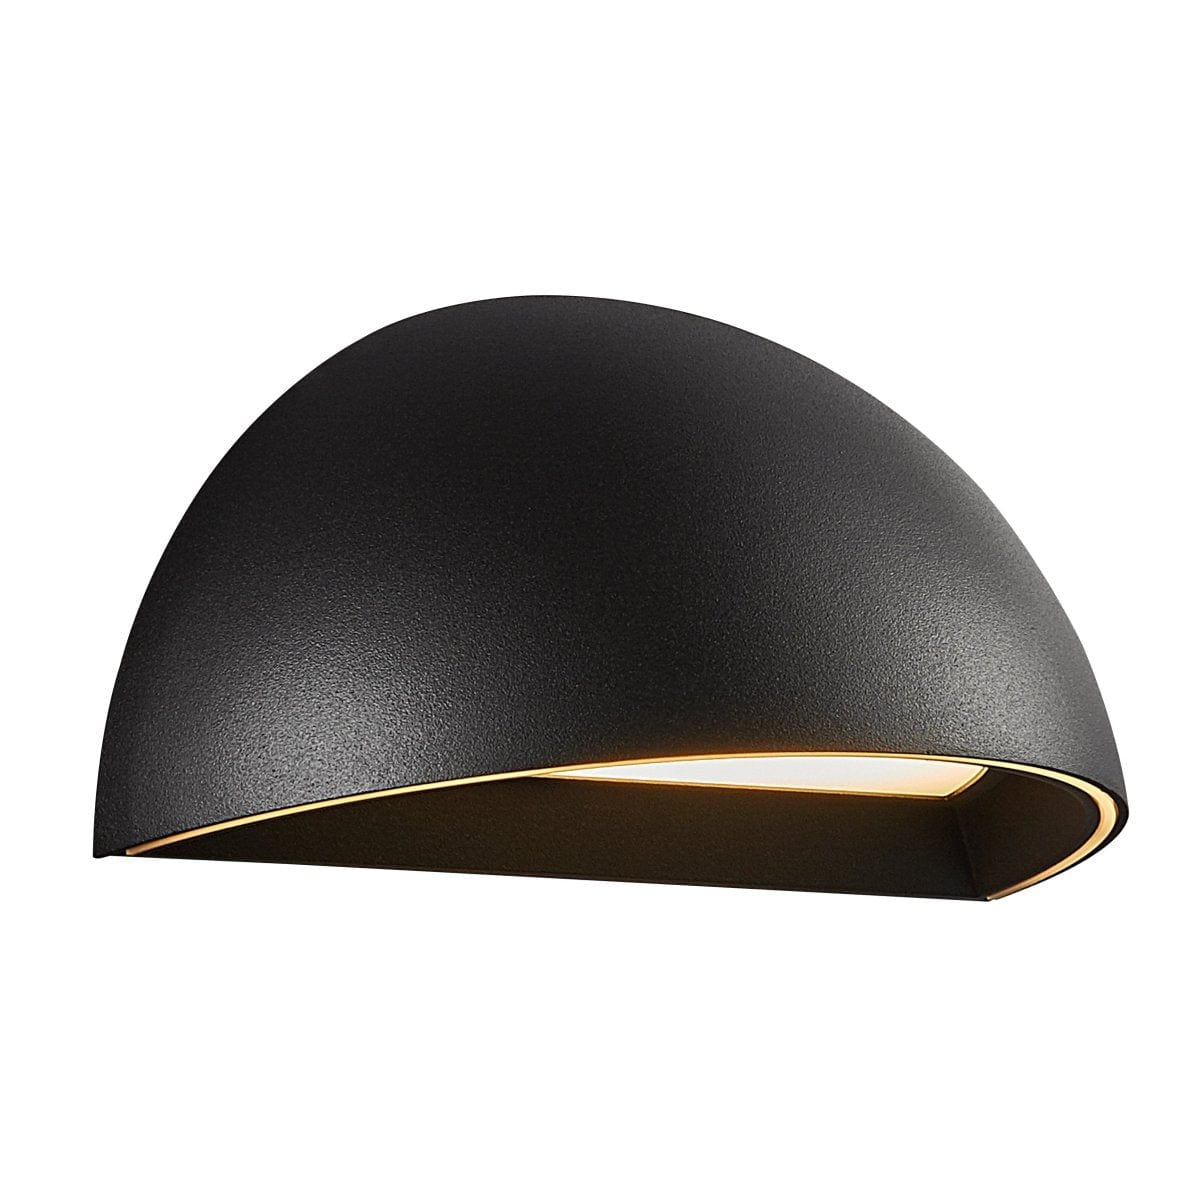 Nordlux Outdoor Lights Arcus Smart Outdoor Wall Light, black or grey